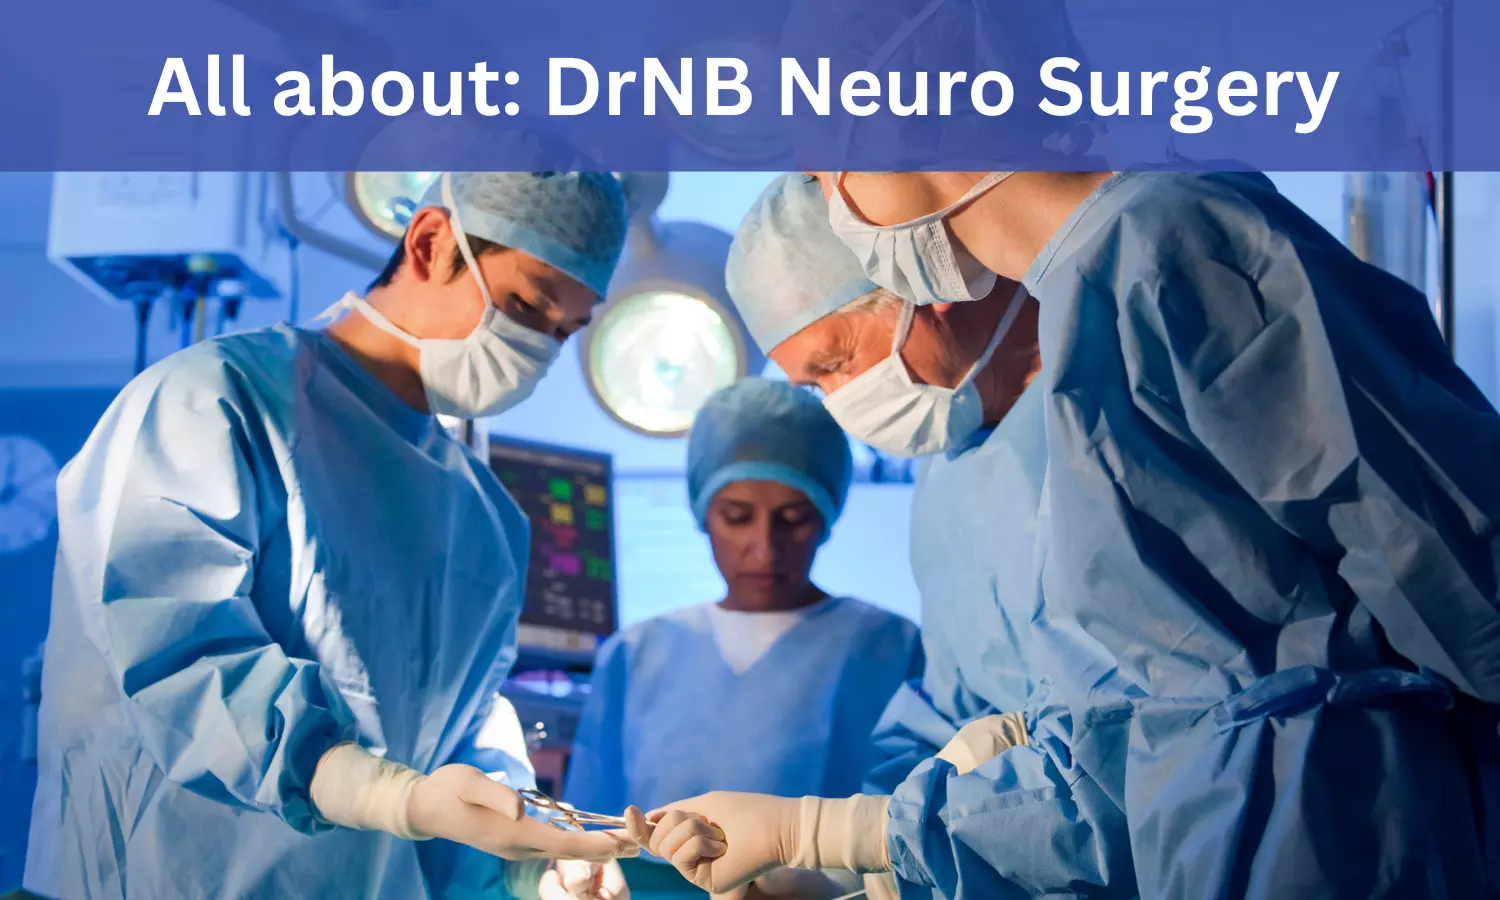 DrNB Neuro Surgery: Admissions, Medical Colleges, Fees, Eligibility Criteria details here